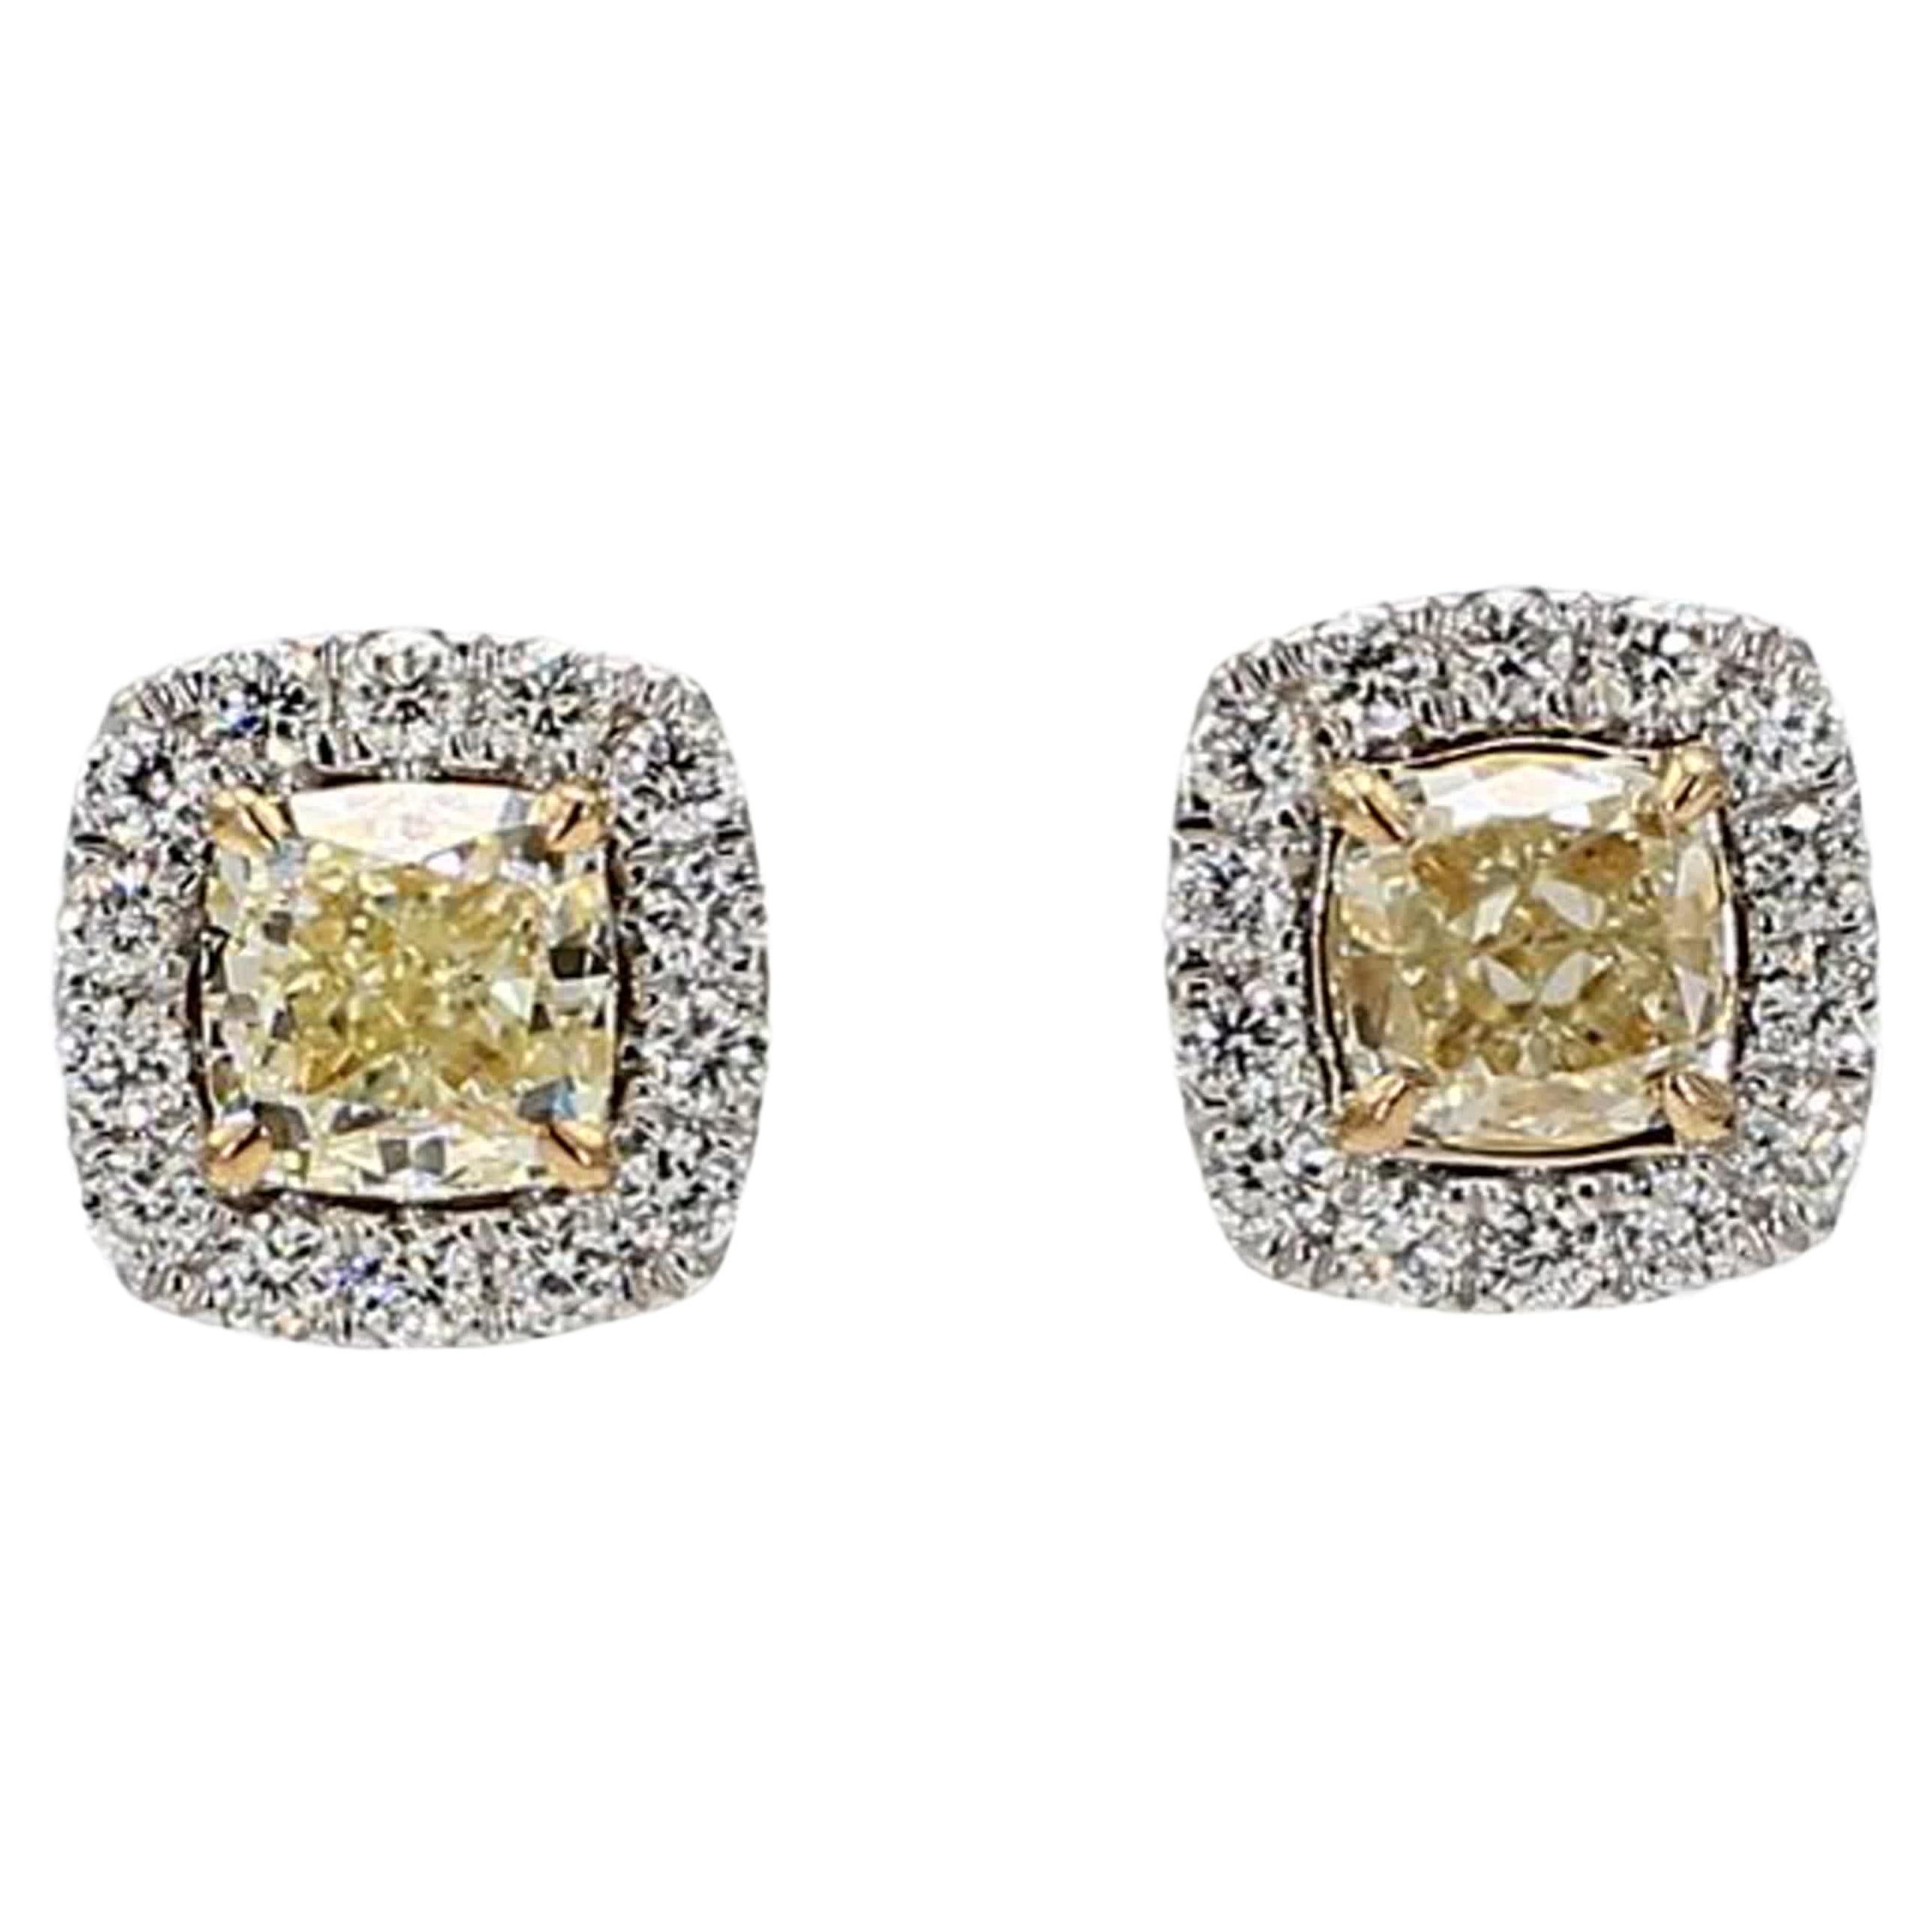 Natural Yellow Cushion and White Diamond 1.25 Carat TW Gold Stud Earrings